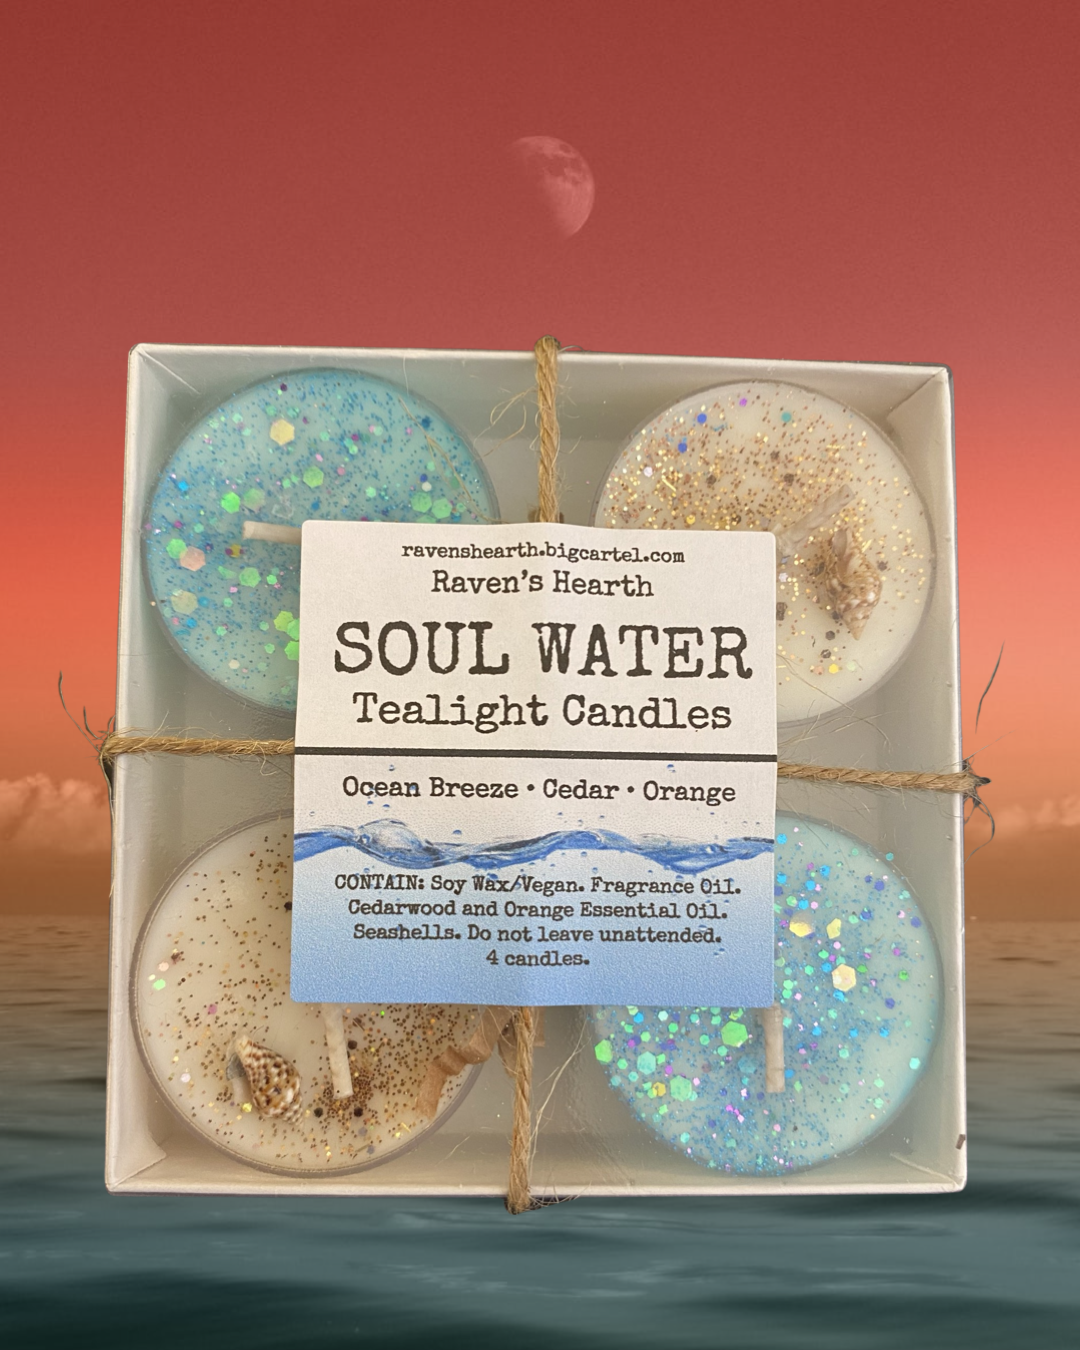 SOUL WATER Tealight Candles 🌊 New! by Raven’s Hearth - gift